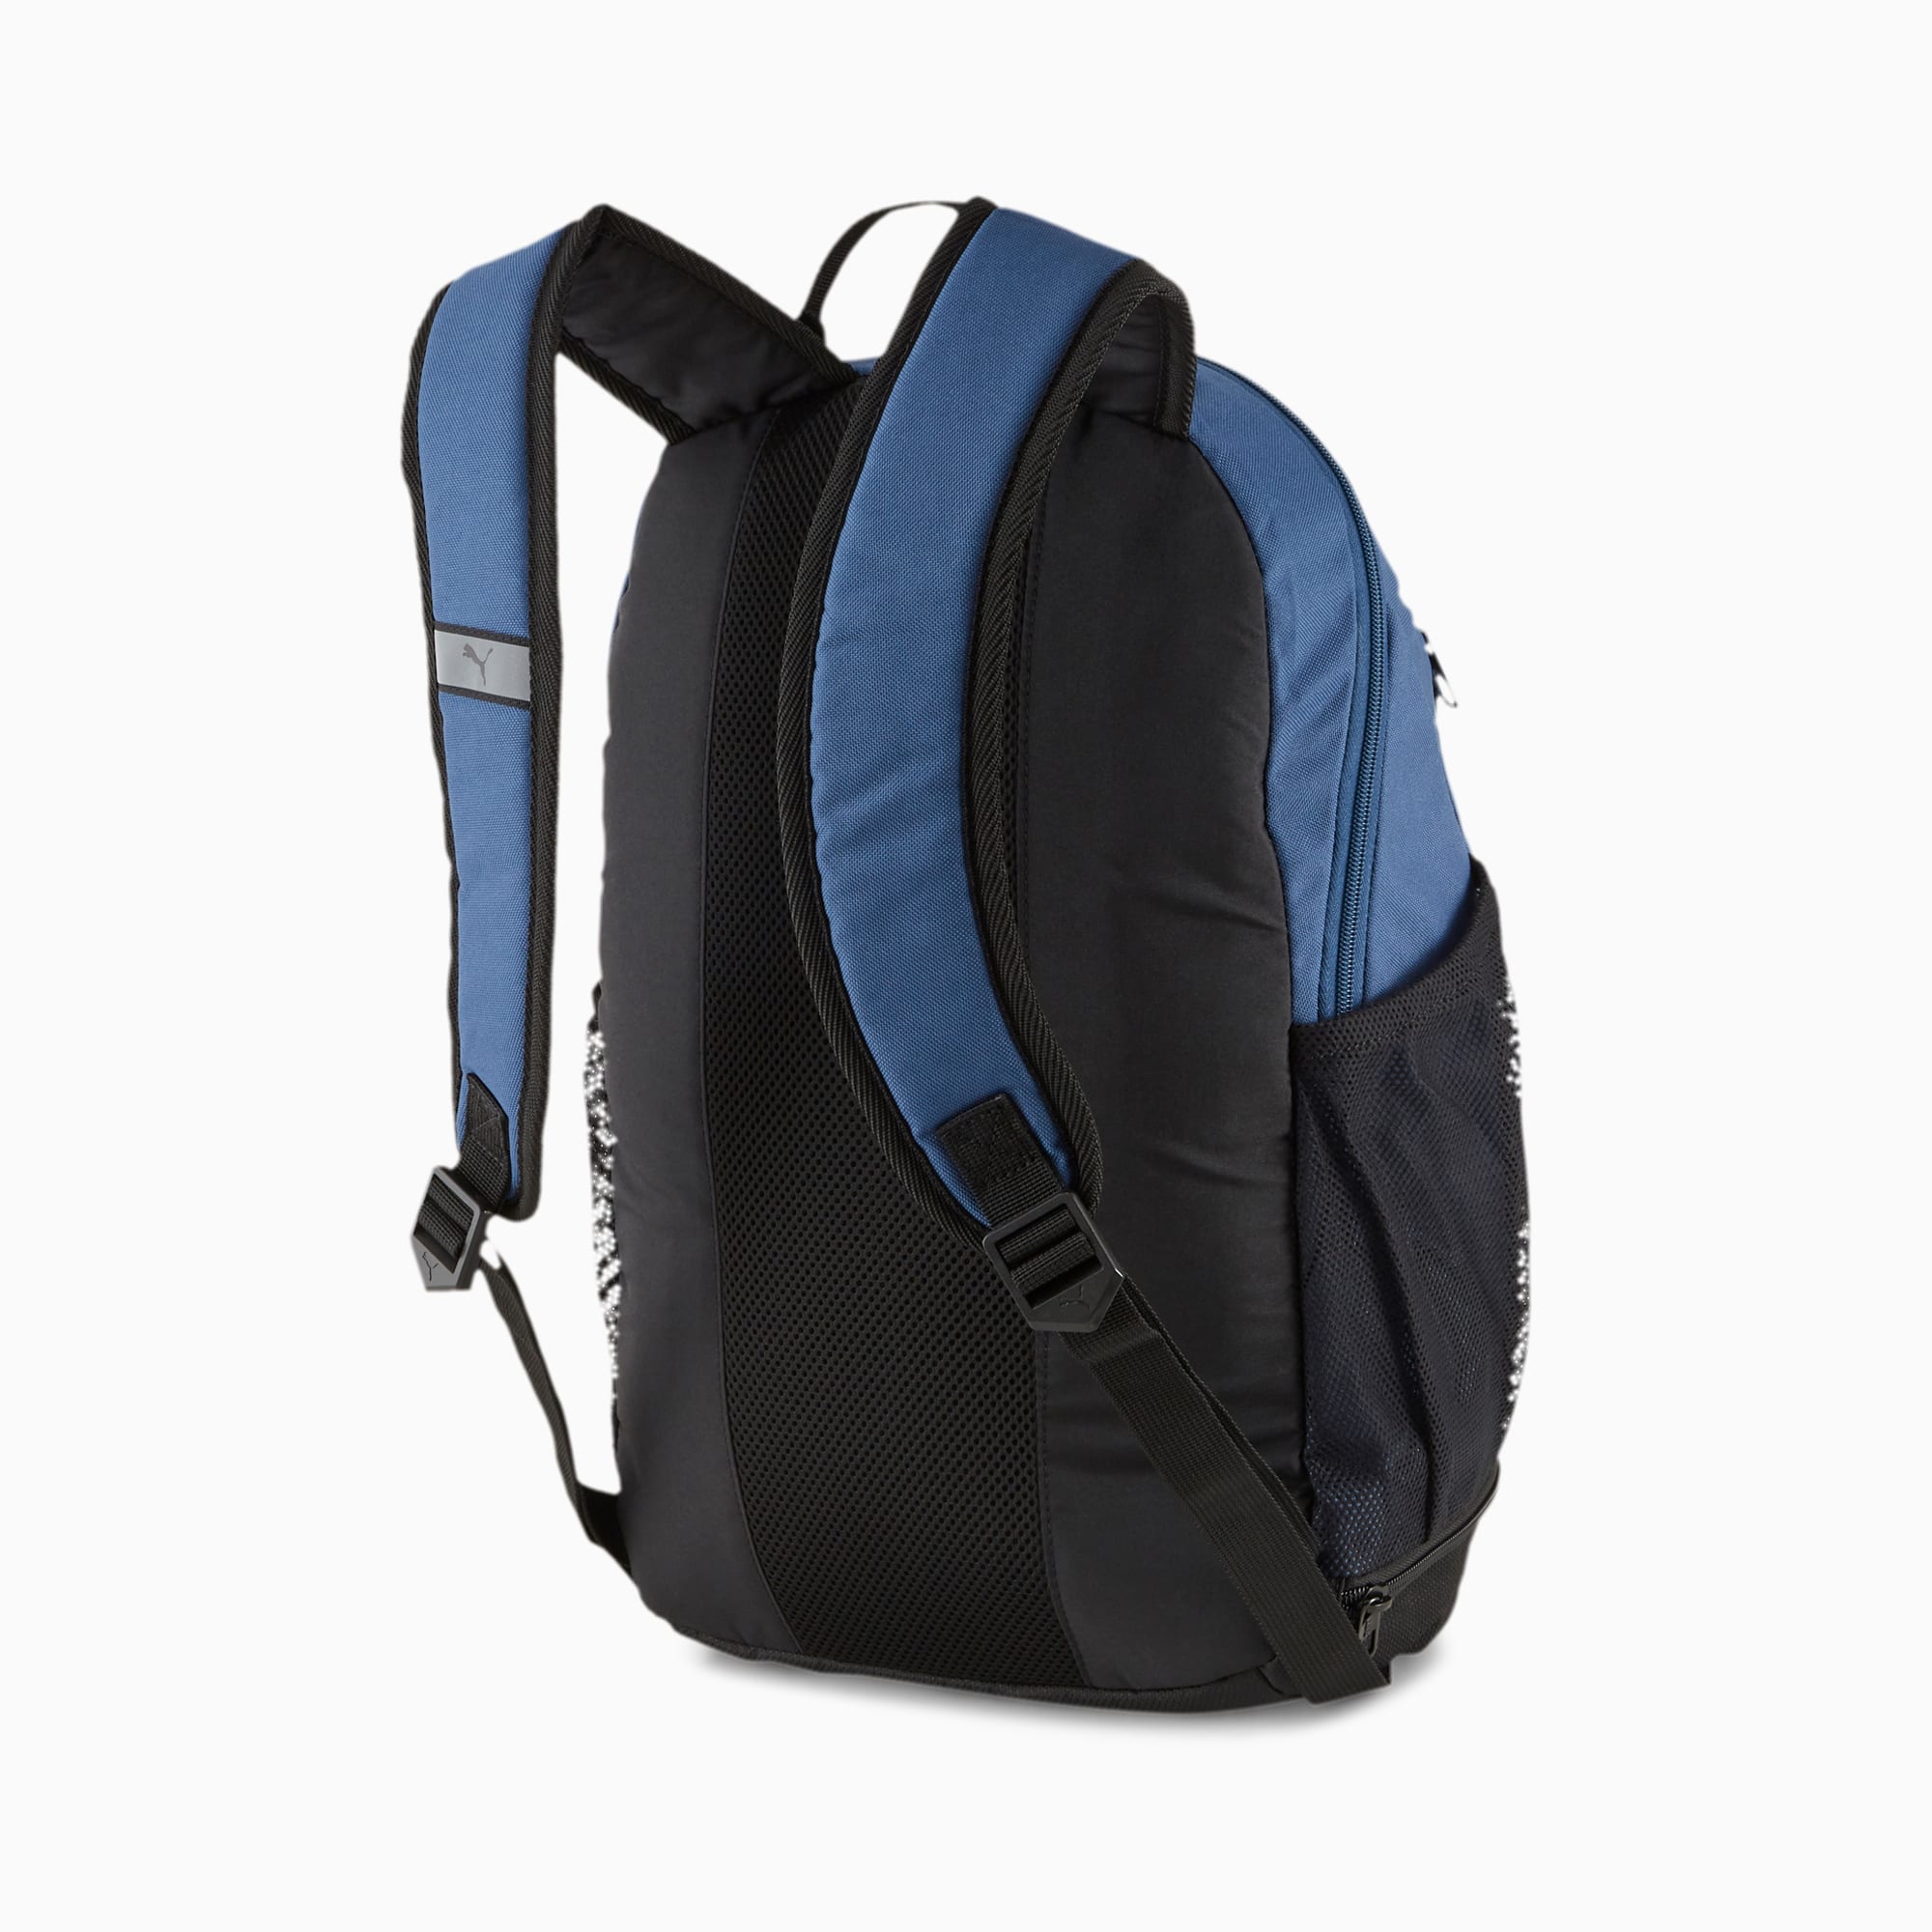 puma vibe backpack review